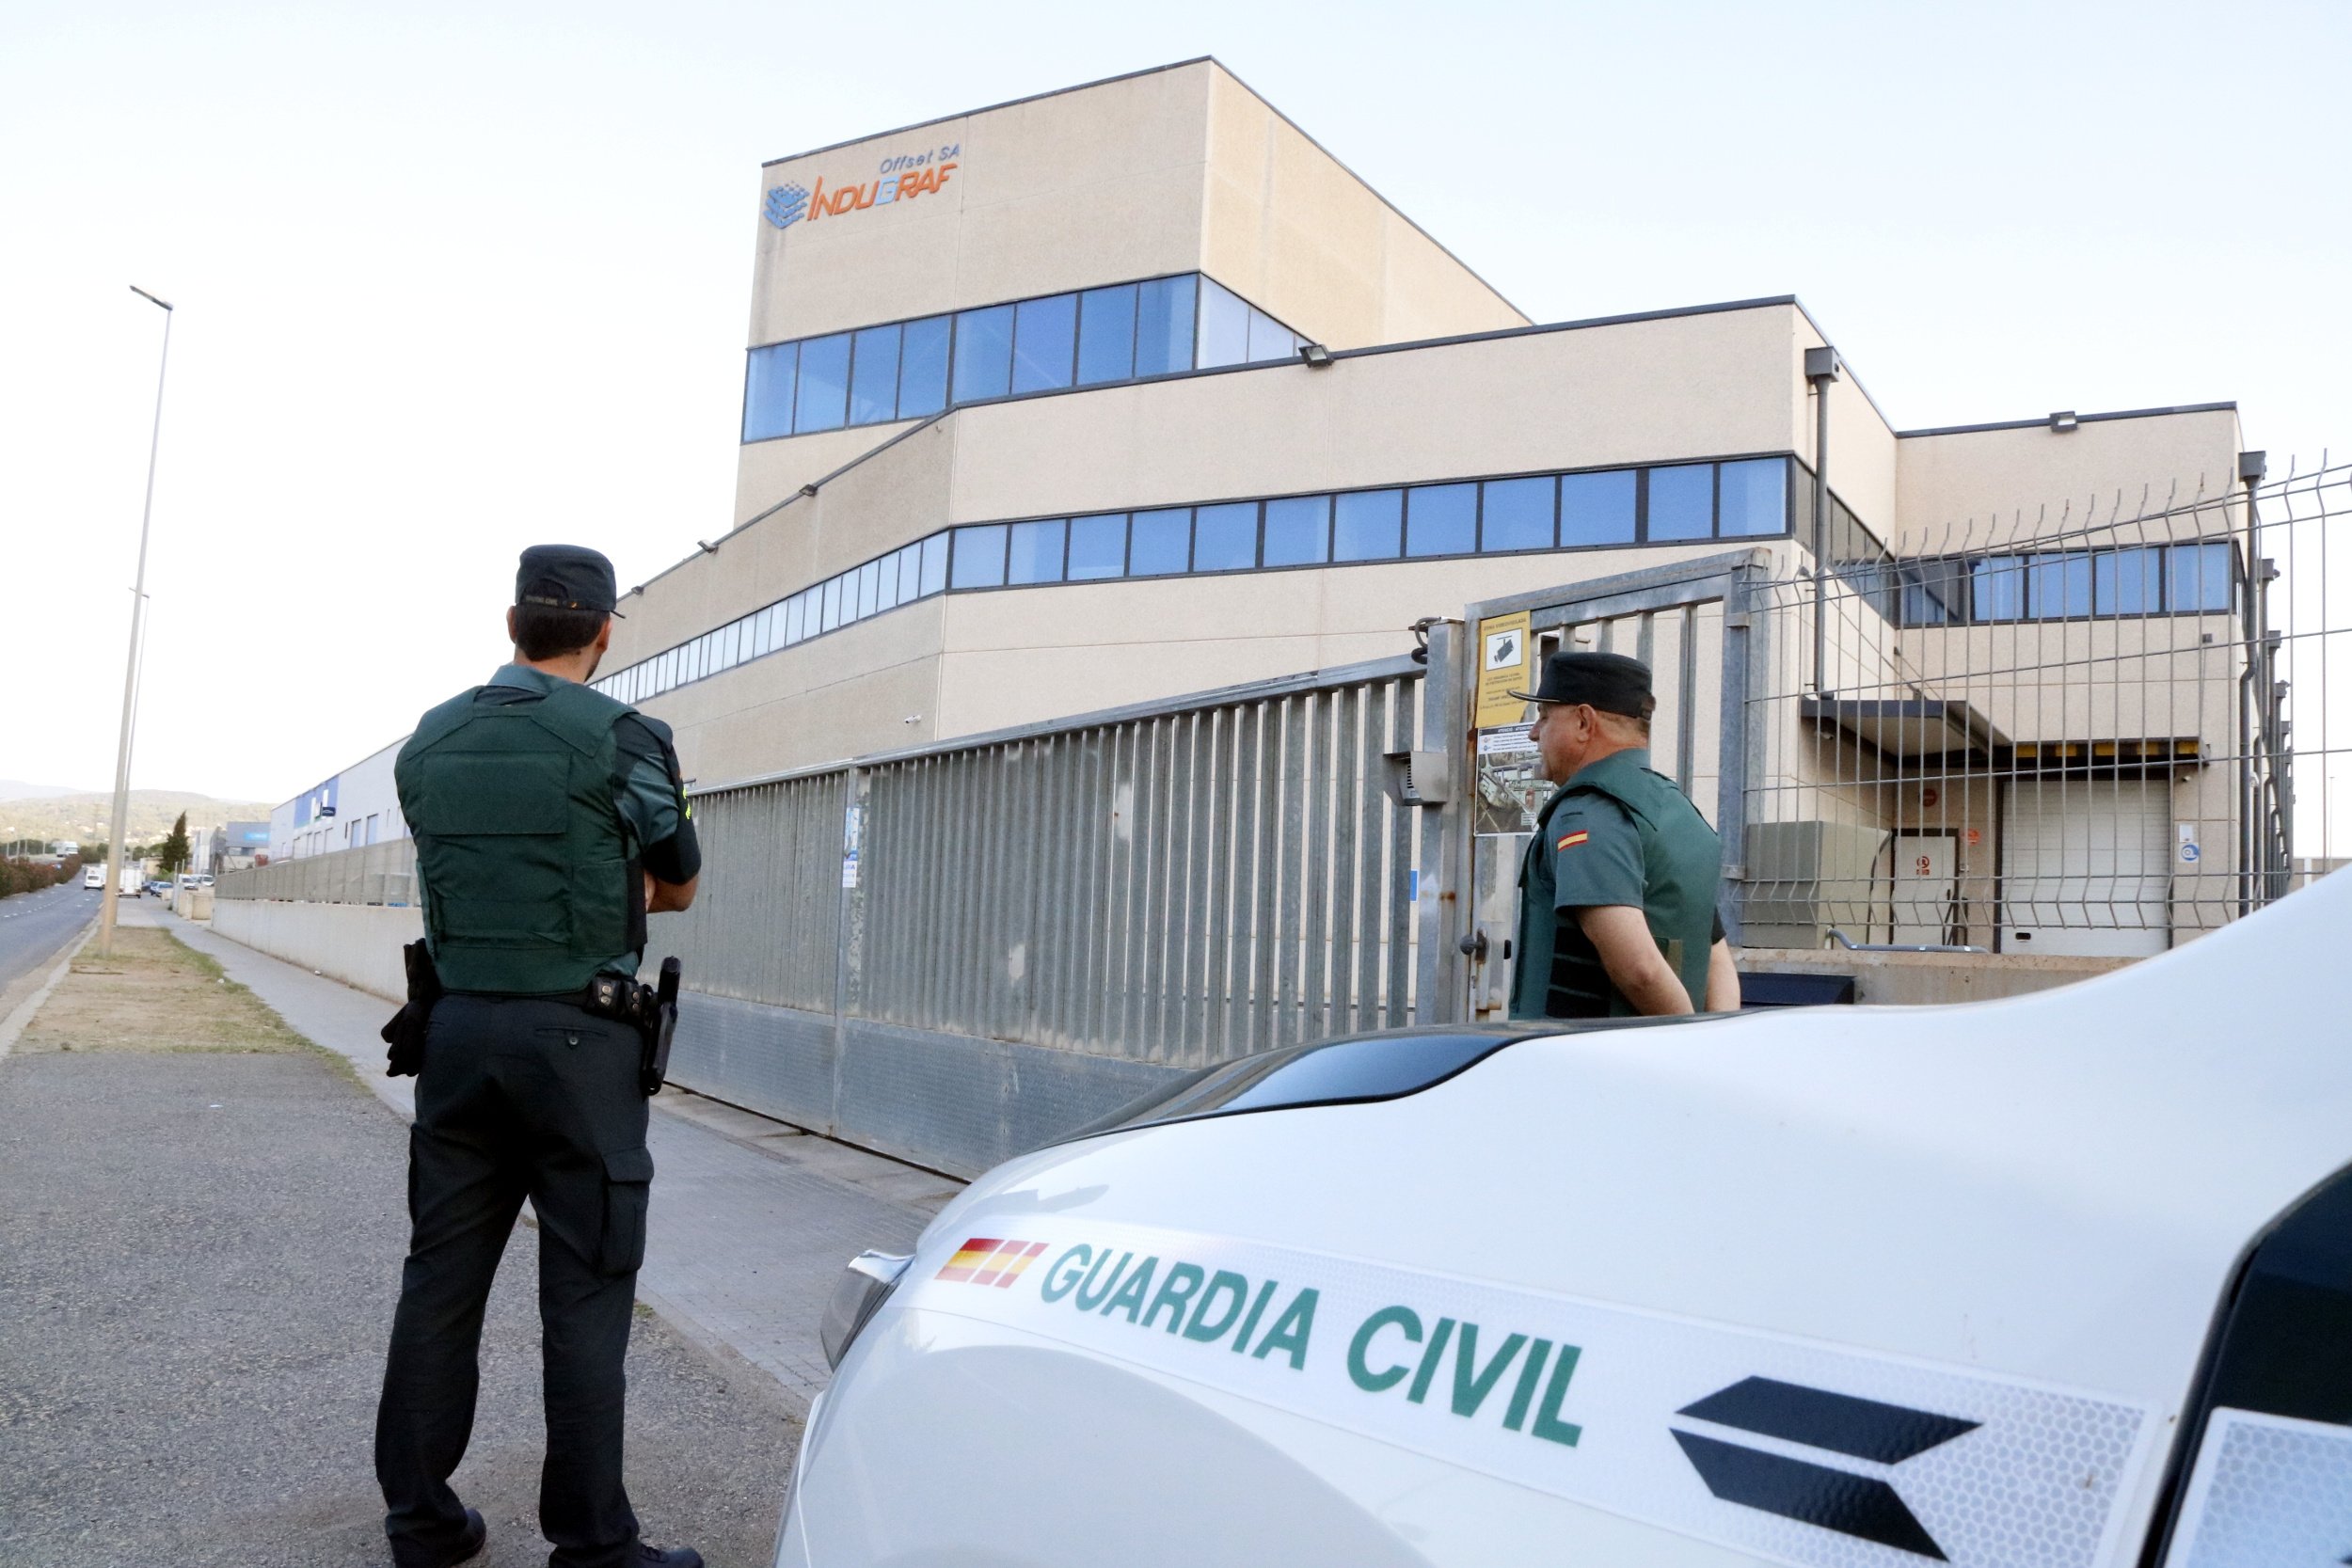 Civil Guard finds nothing in printers searched in relation to referendum